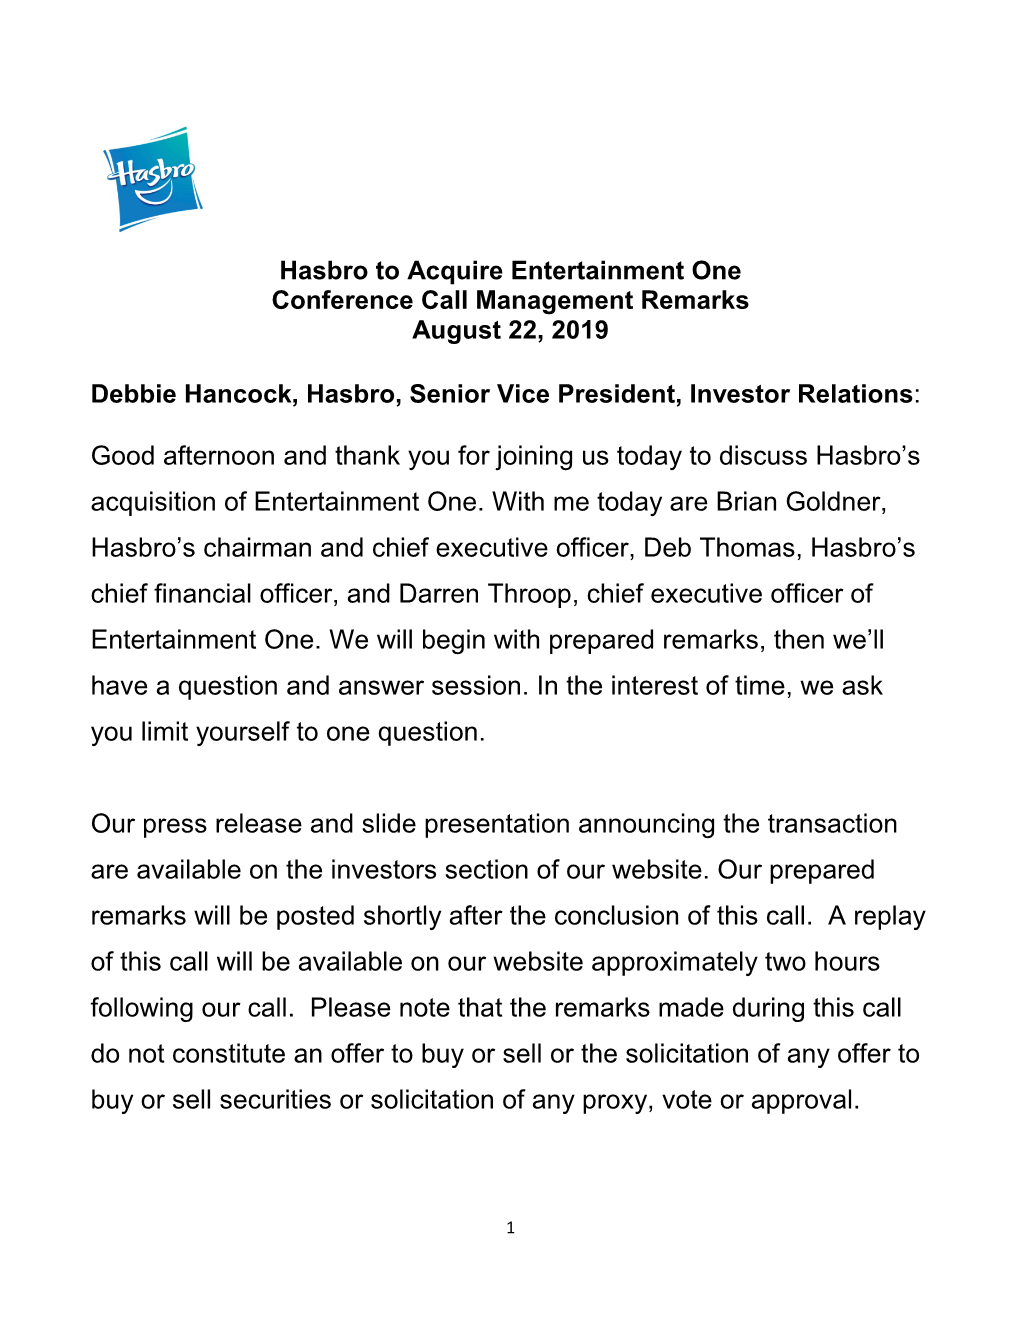 Hasbro to Acquire Entertainment One Conference Call Management Remarks August 22, 2019